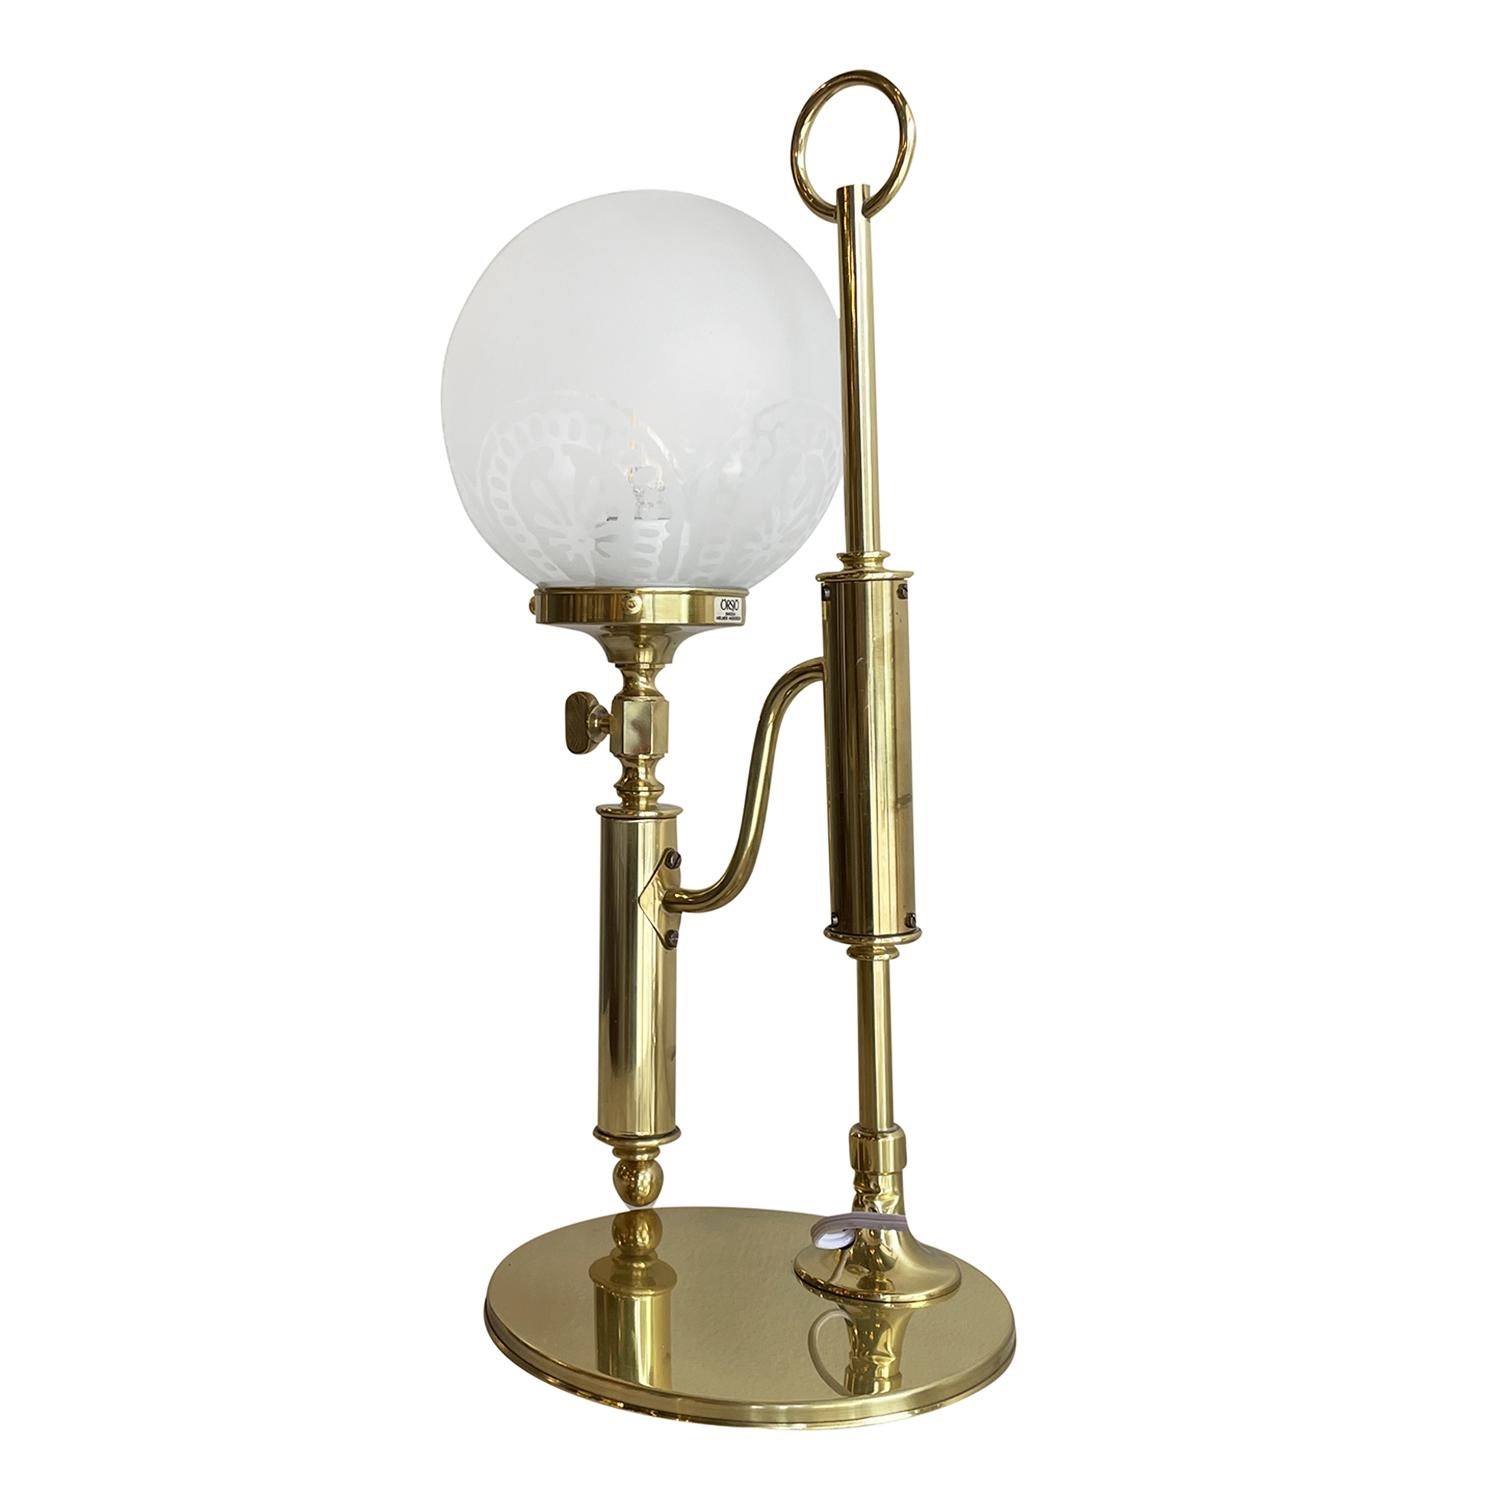 A vintage Mid-Century Modern Swedish table lamp made of hand crafted polished brass, designed by Helmer Andersson and produce by Örsjö in good condition. The detailed Scandinavian light is composed with a round, open hand blown polished glass shade,